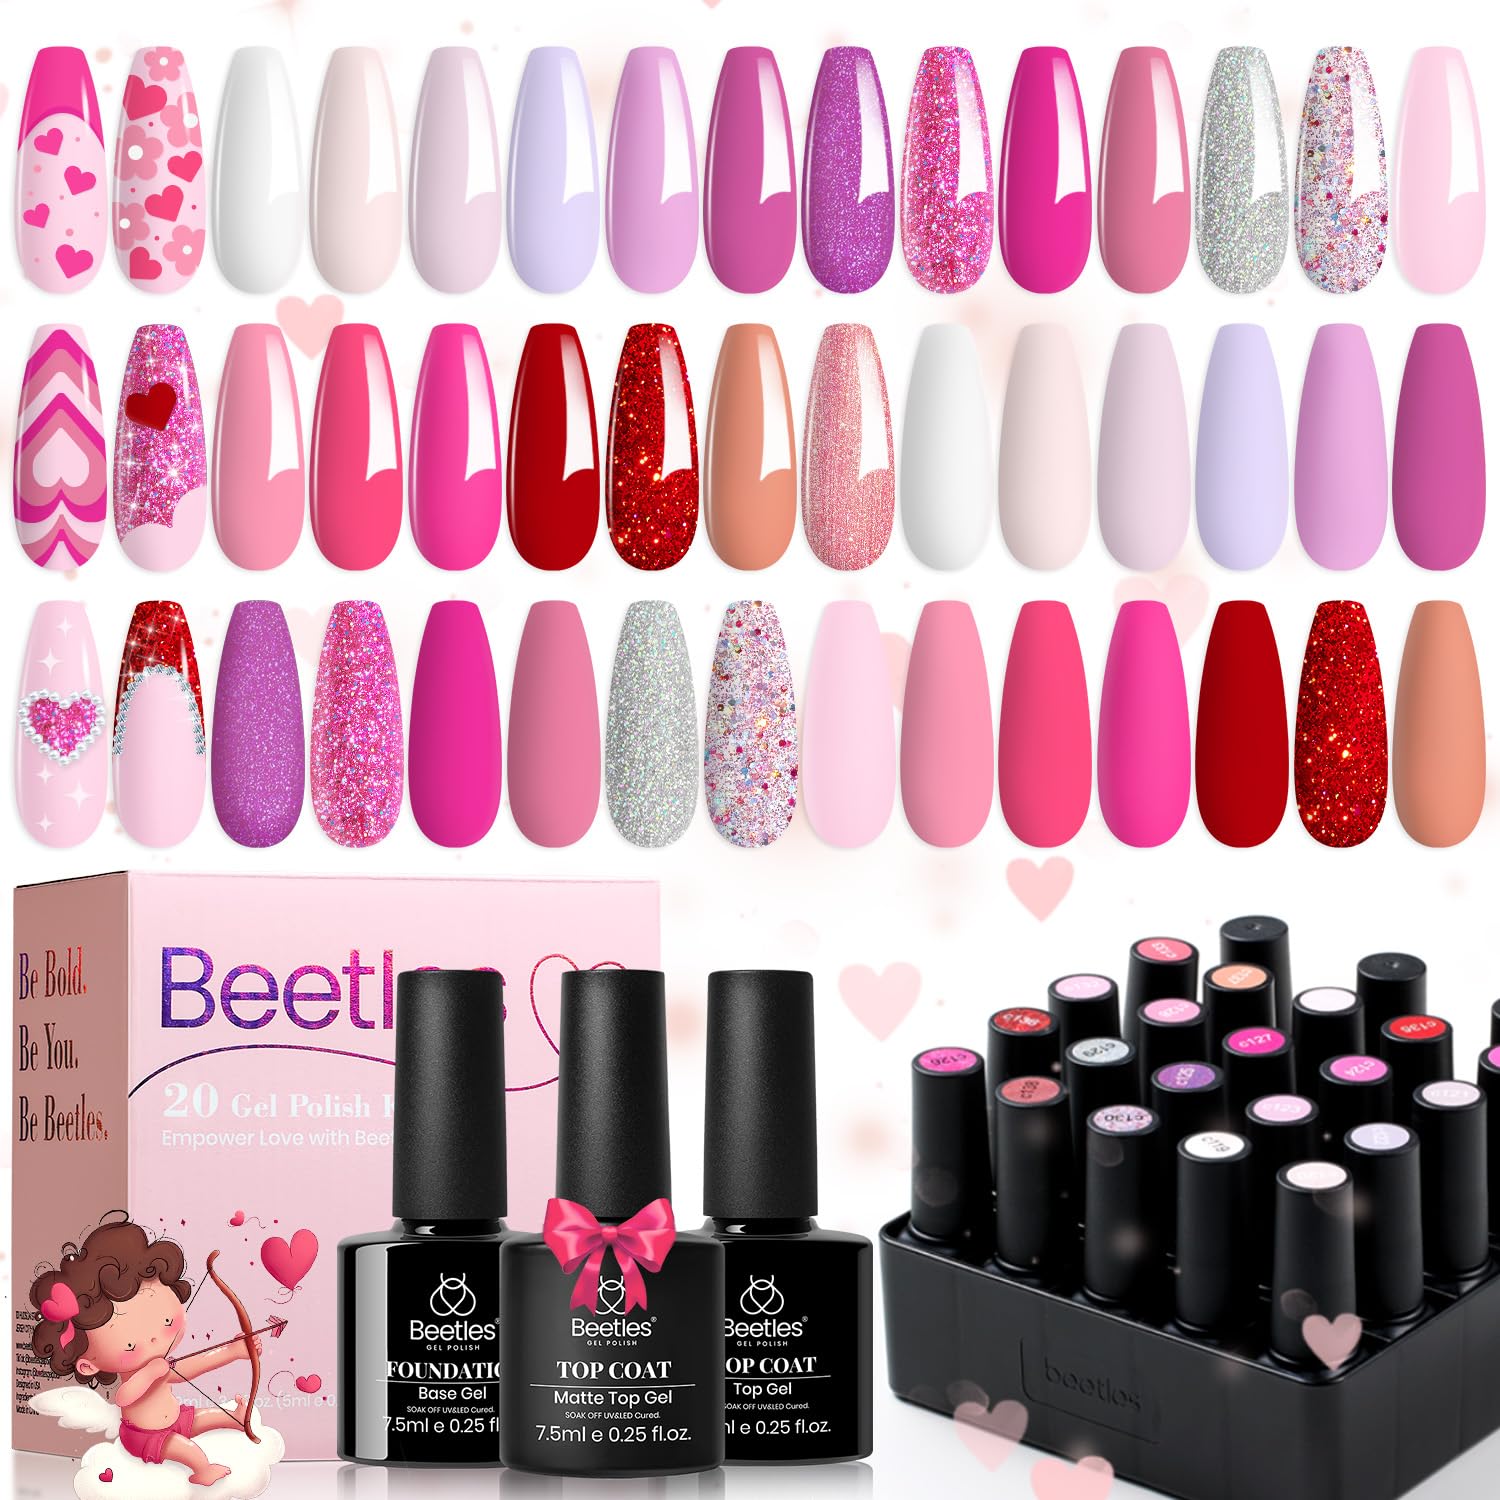 Candy Lover Gel Nail Polish Kit with LED UV Lamp, 12 Colors Gel Nail Polish  Set, Soak Off Gel Polish Kit, All-in-One Nail Kit, Quality Gel Polish, DIY  Manicure Gel Nails Kit